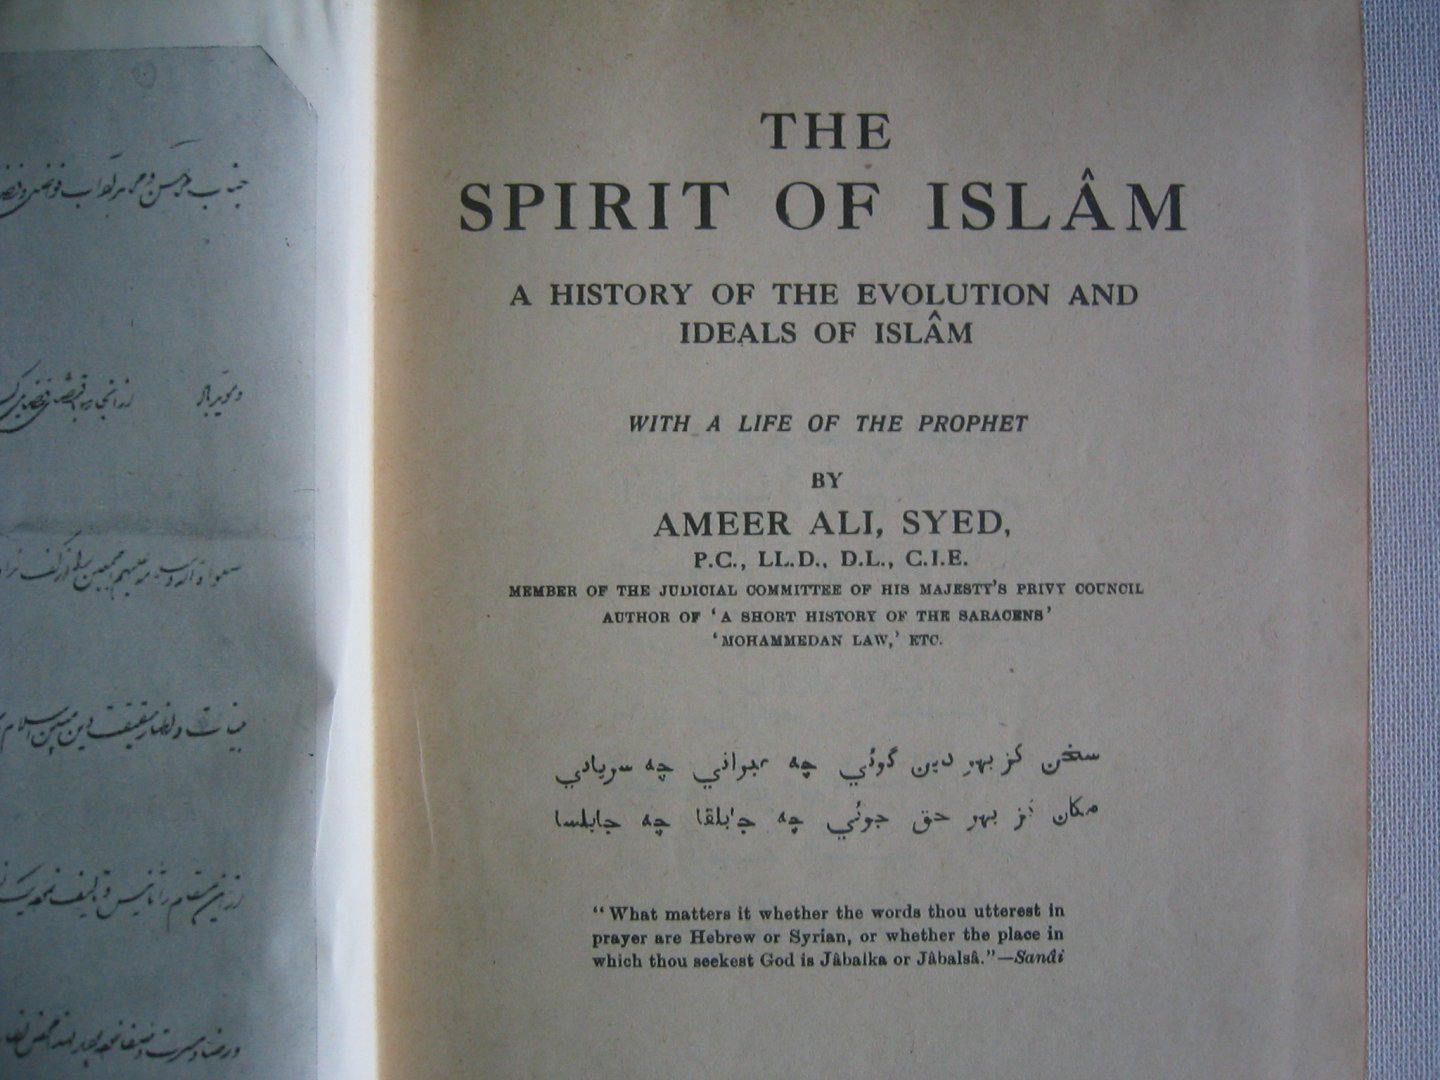 Ameer Ali, Syed - The spirit of Islam. A history of the evolution and ideals of Islam, with a life of the prophet.